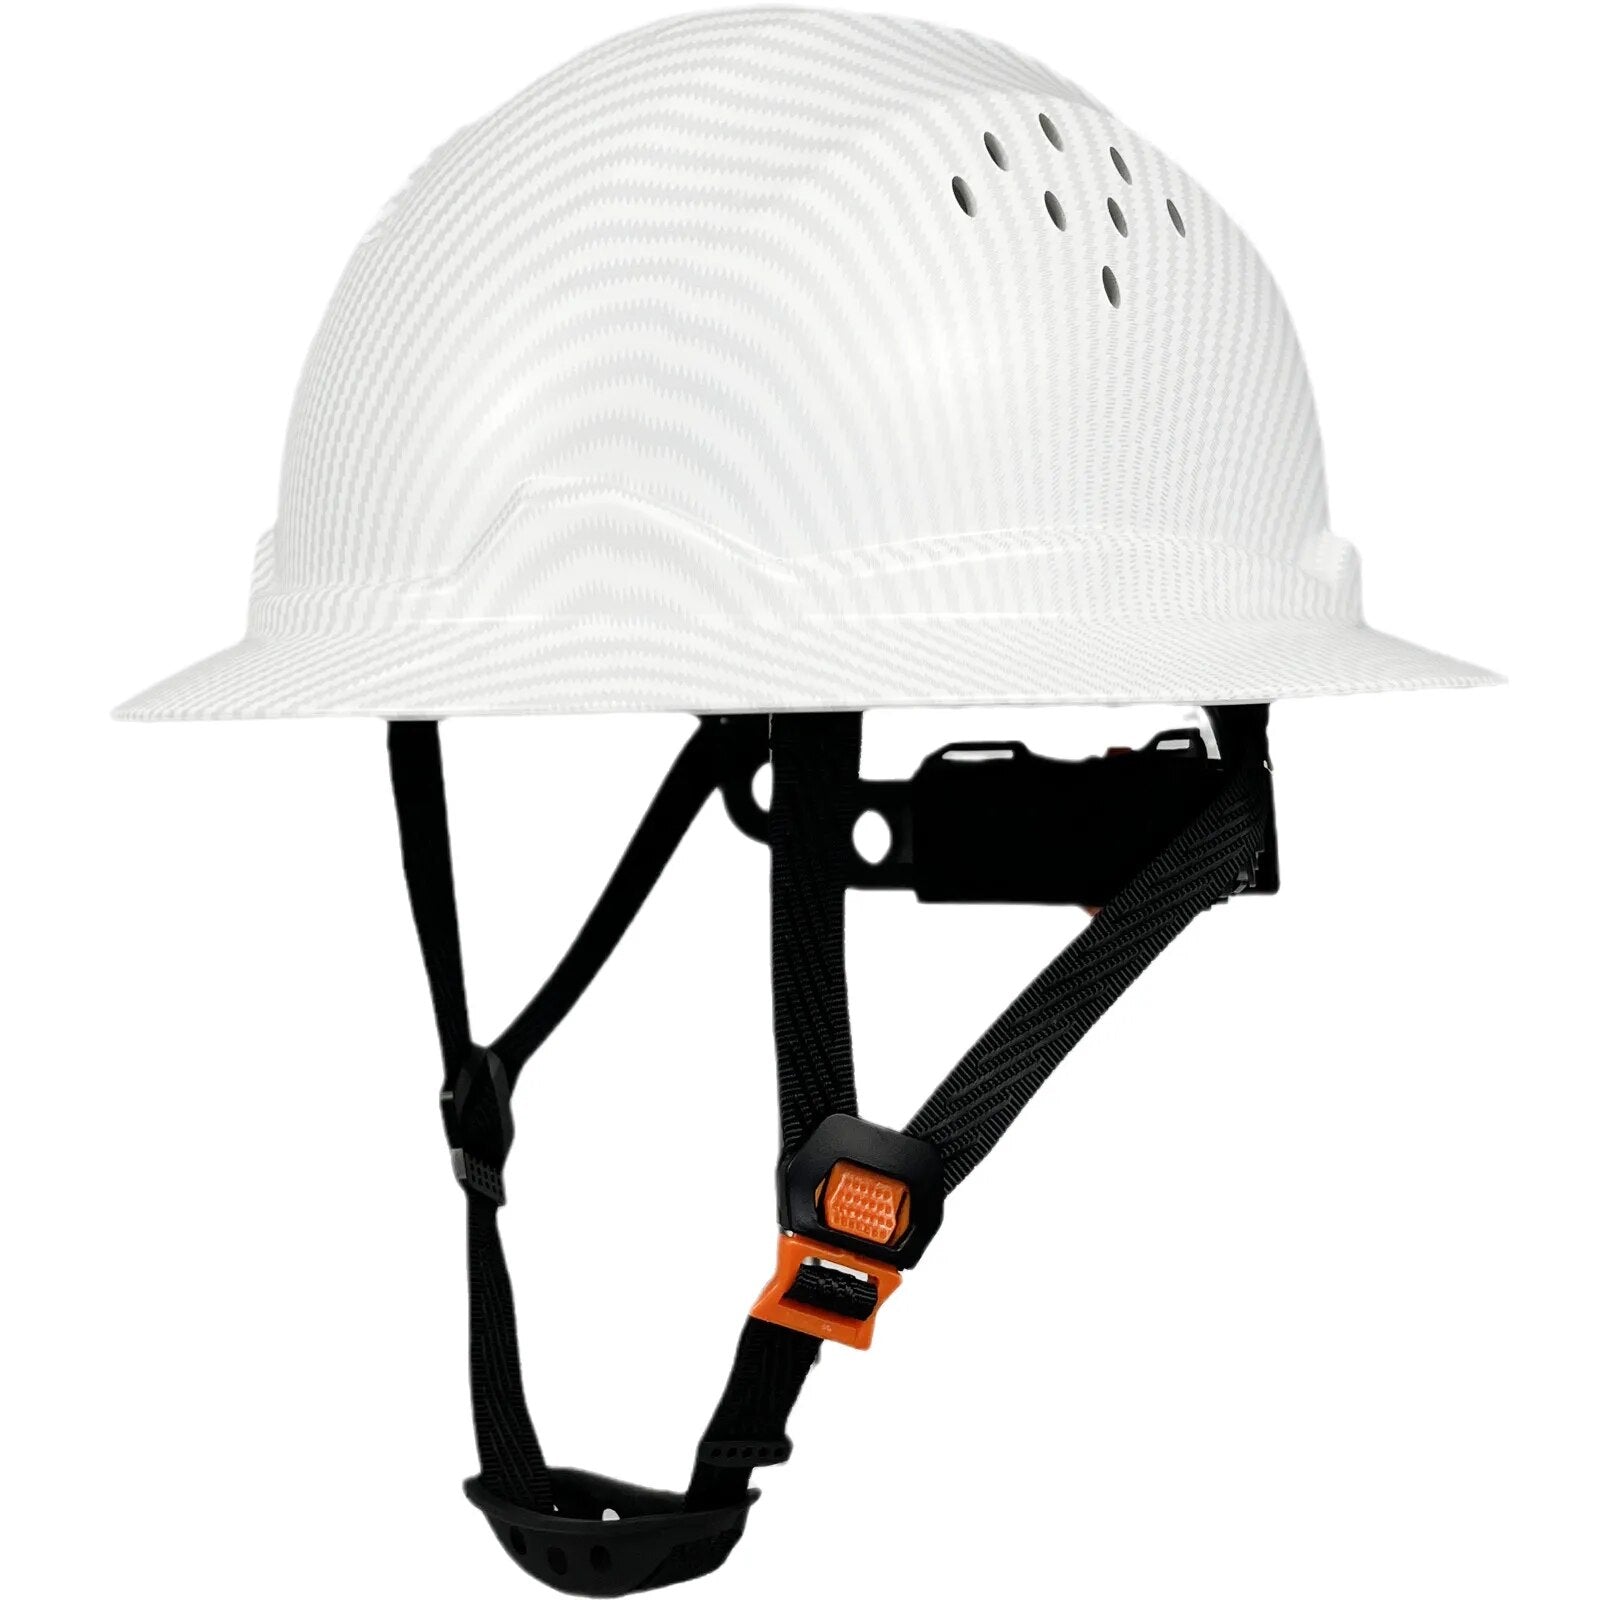 ANSI Approved HDPE Safety Helmet For Engineer Industrial with 6 Point Adjustable